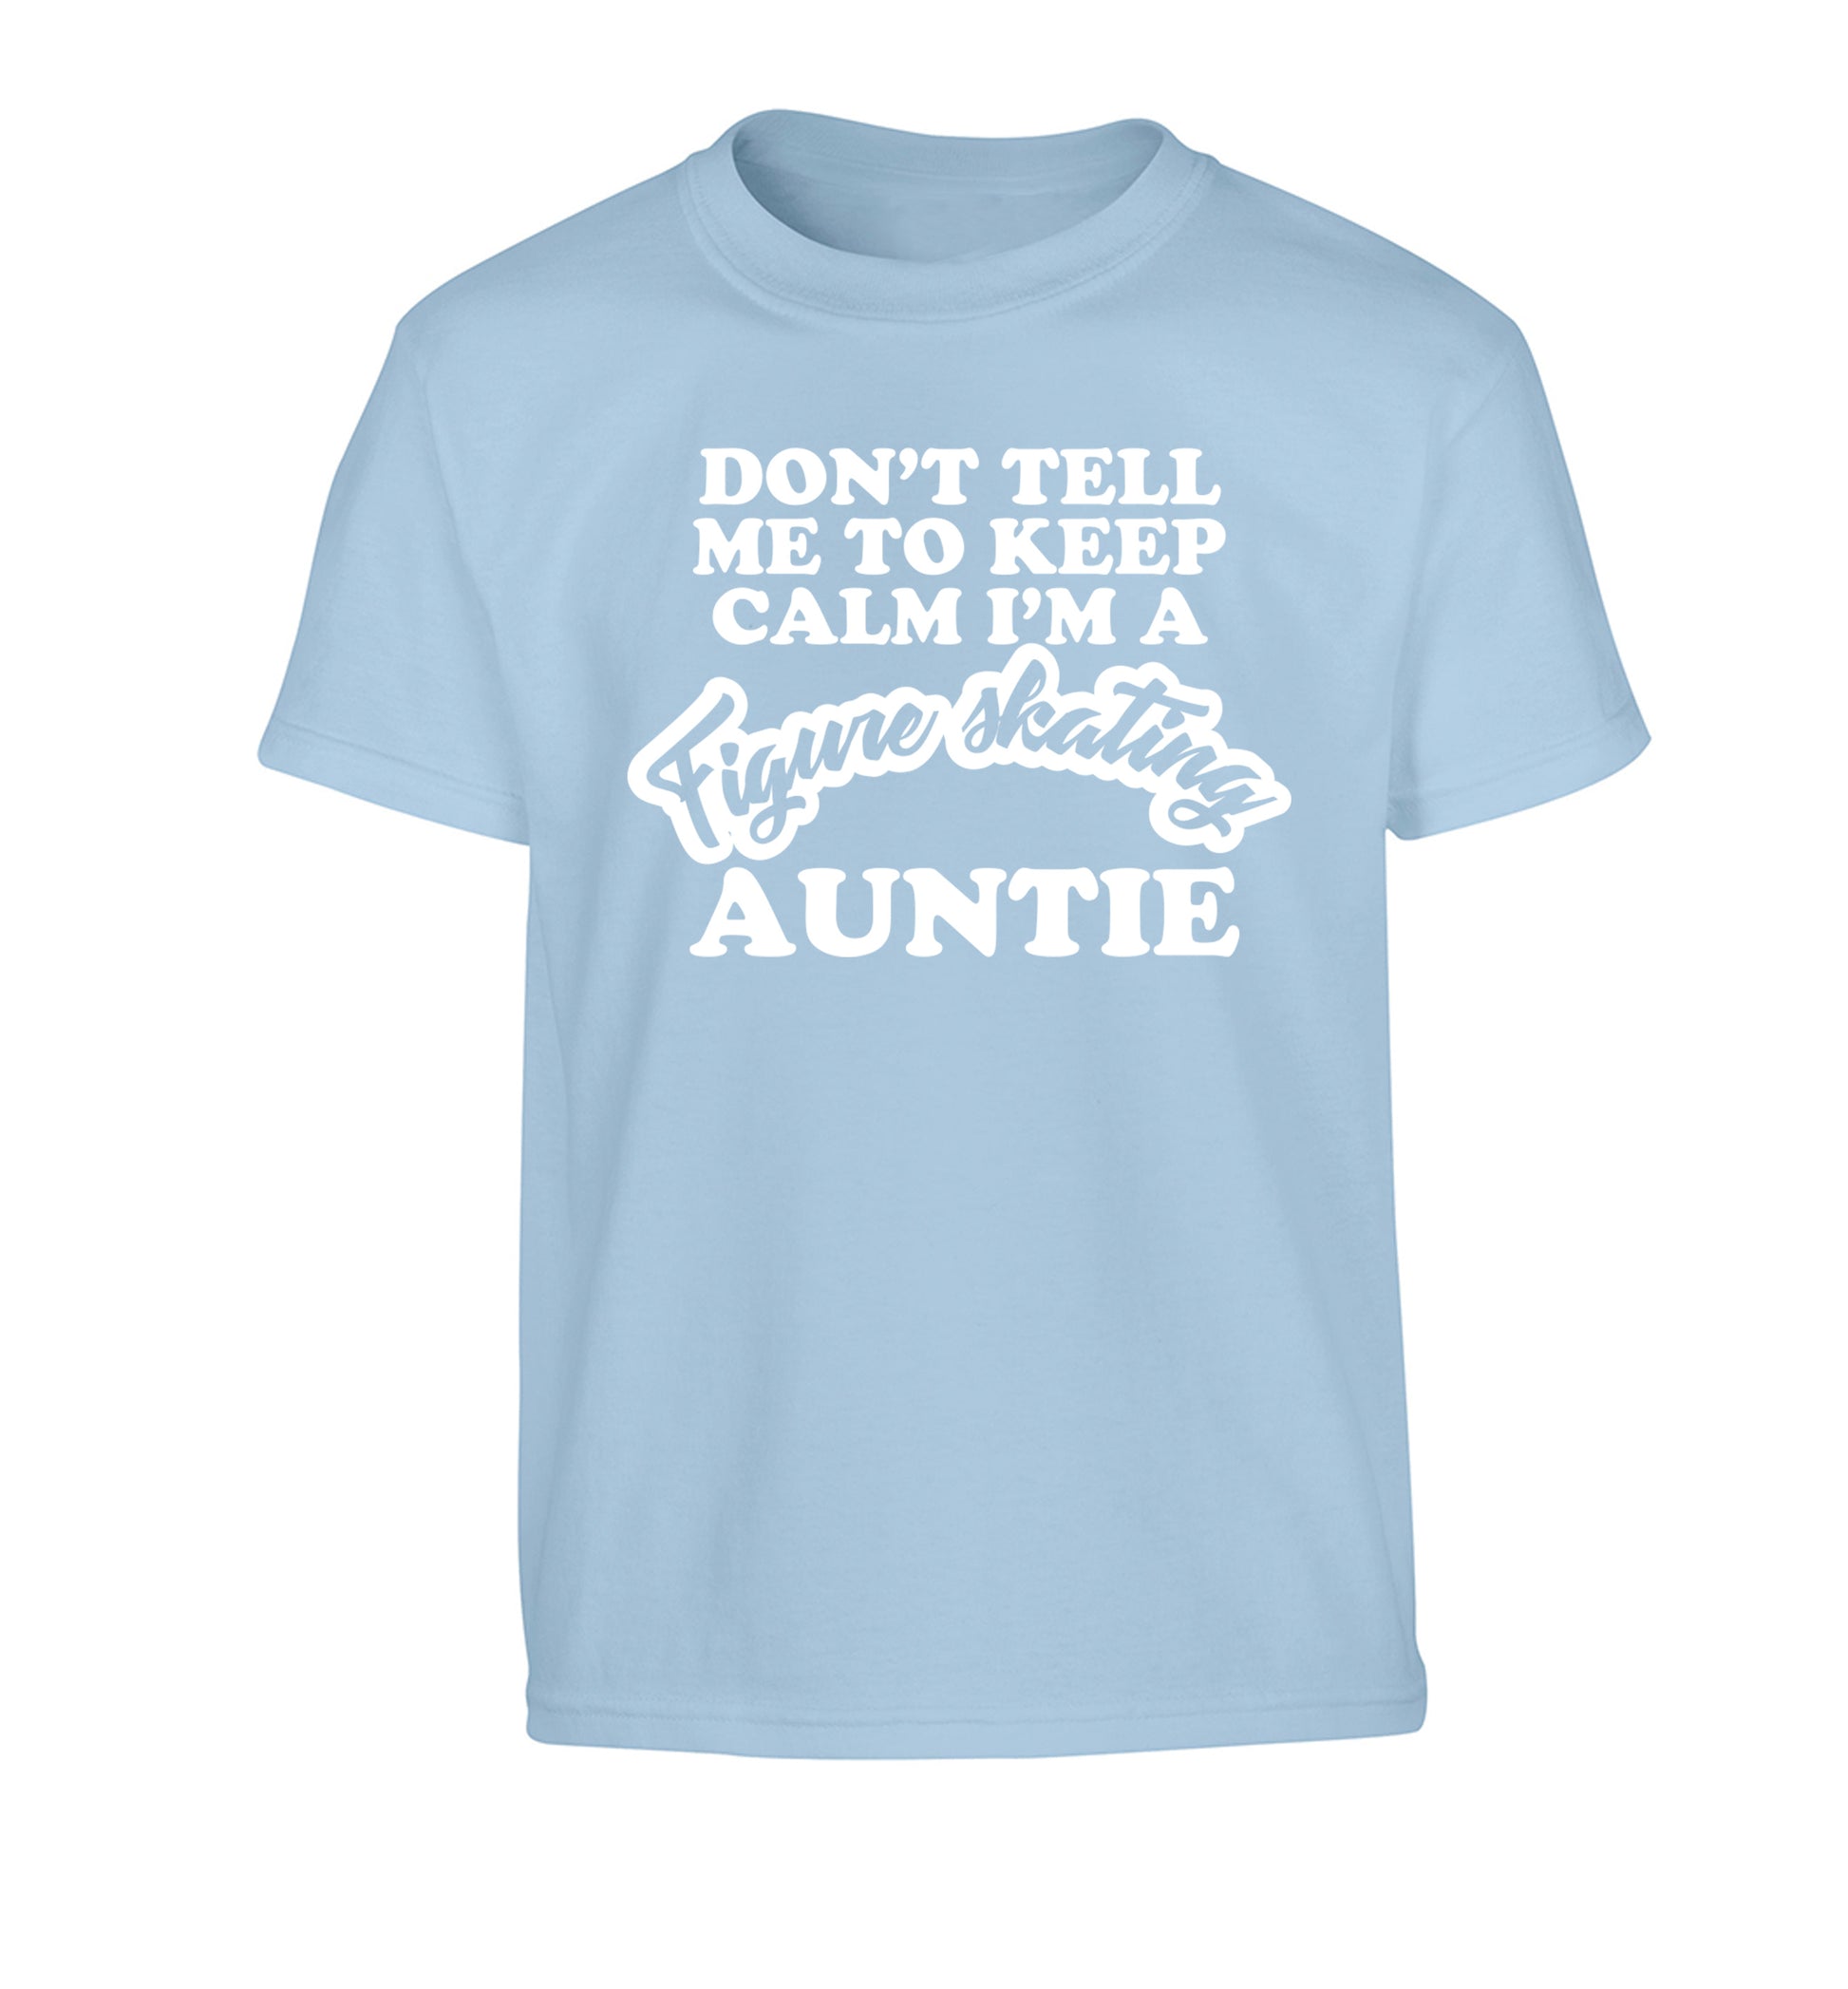 Don't tell me to keep calm I'm a figure skating auntie Children's light blue Tshirt 12-14 Years